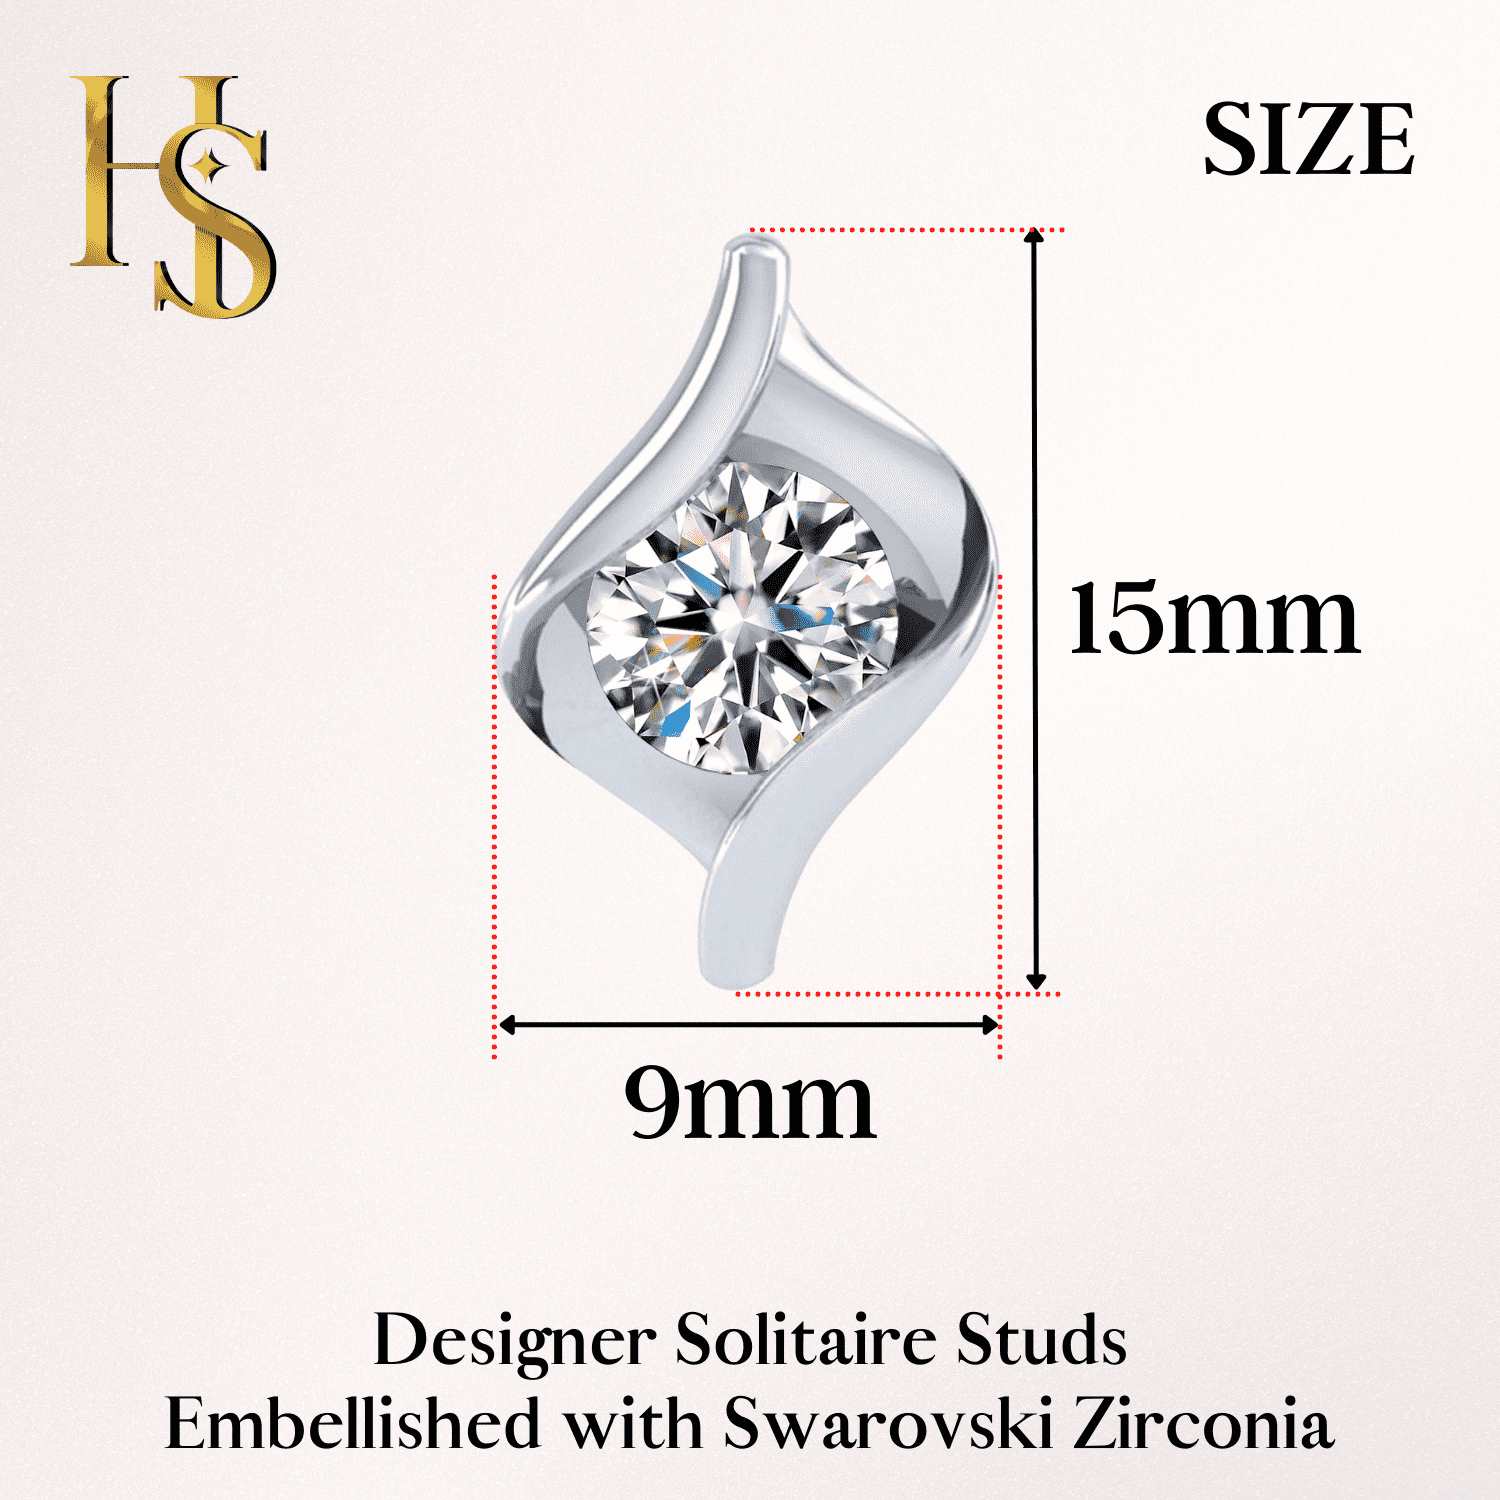 Designer Solitaire Earrings in 92.5 Silver embellished with Swarovski Zirconia